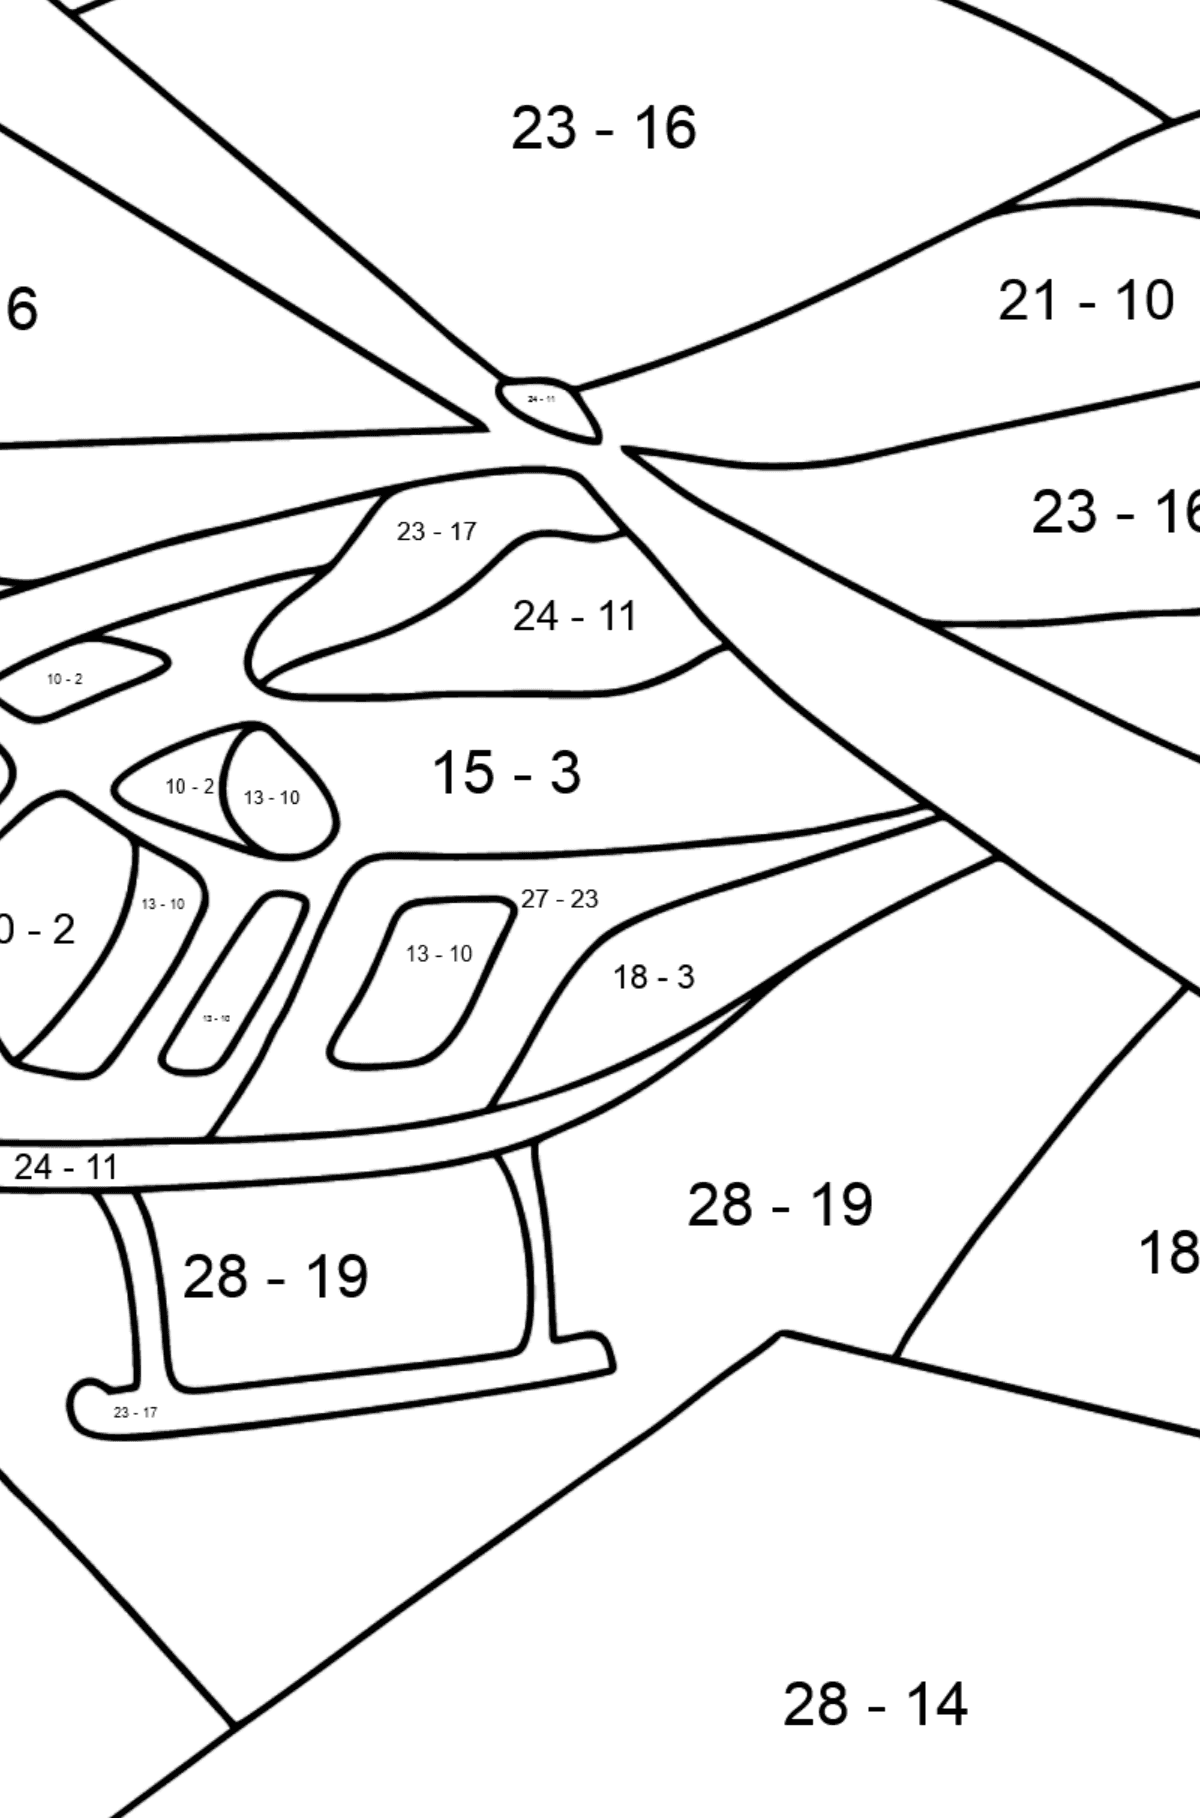 Coloring Page - A Sport Helicopter - Math Coloring - Subtraction for Kids